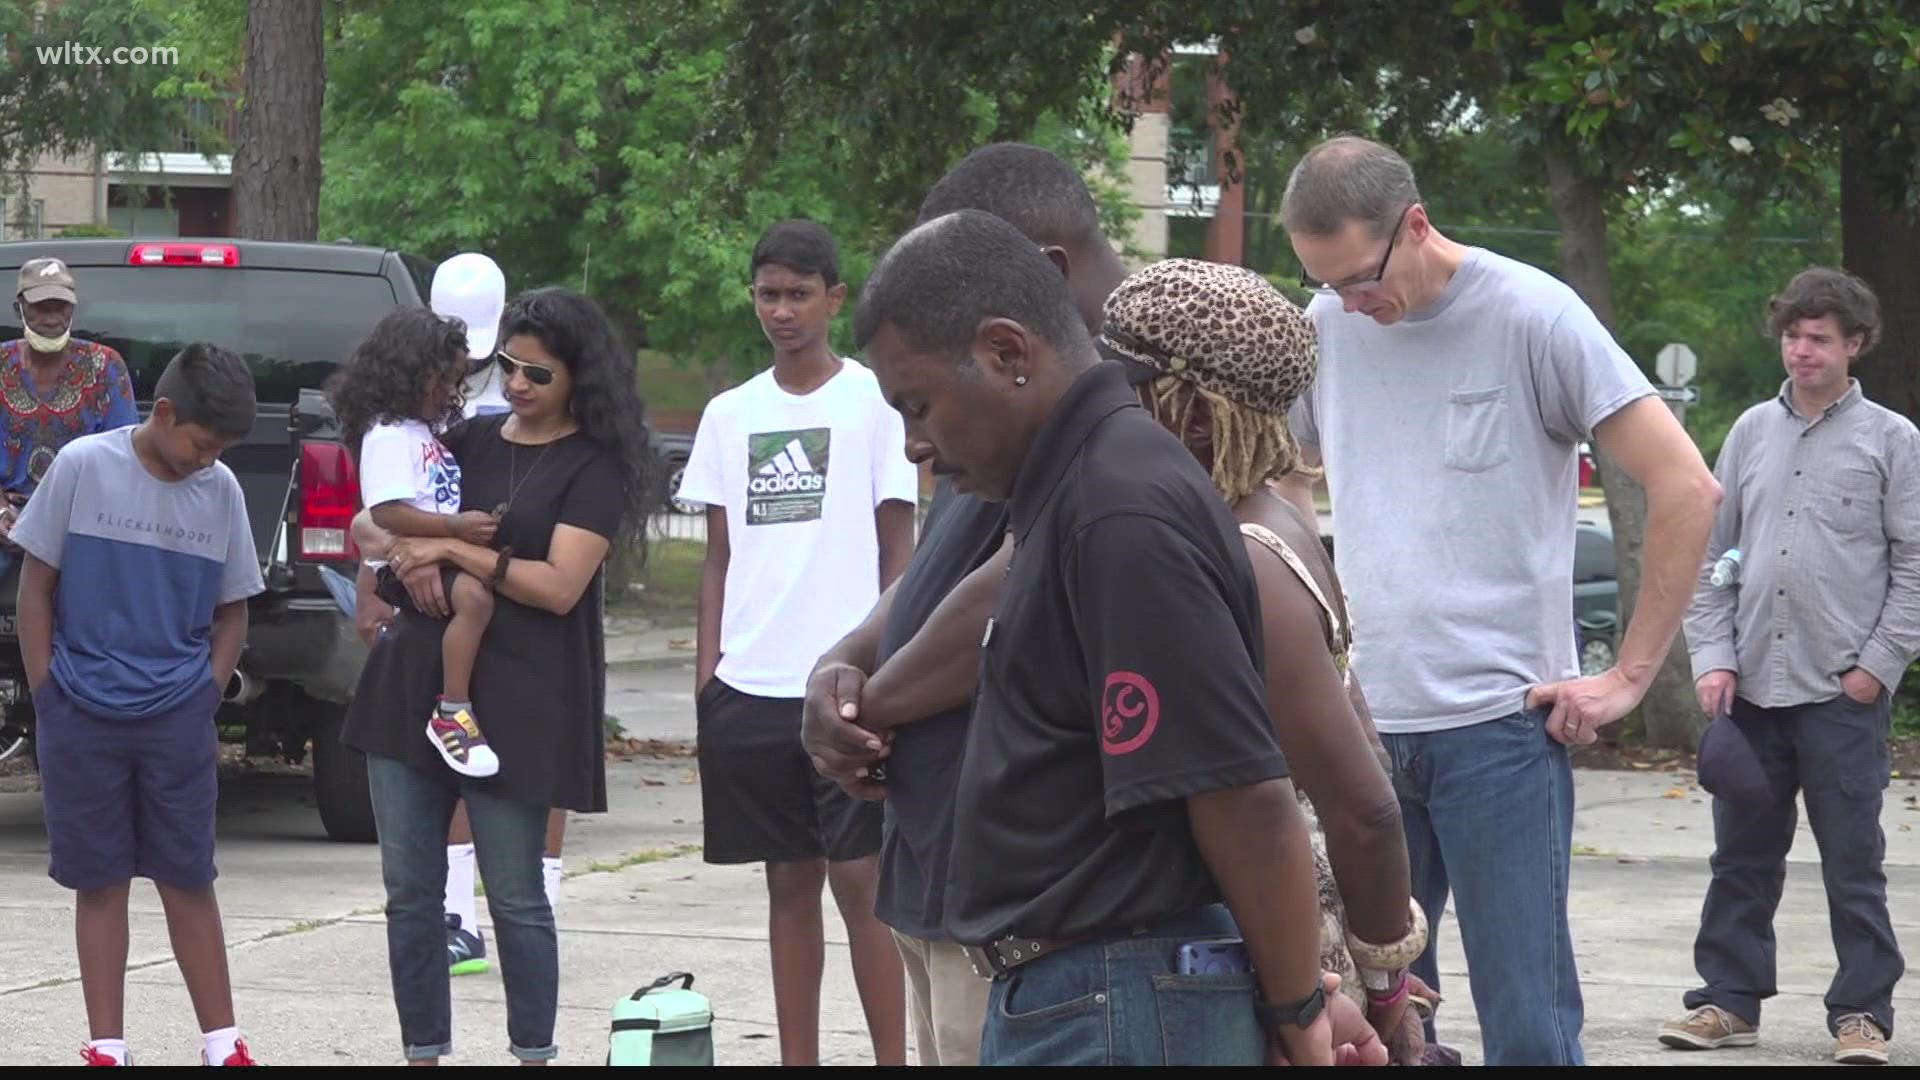 The Real Church began two years ago at Finlay Park in Columbia as a way to help the homeless community.